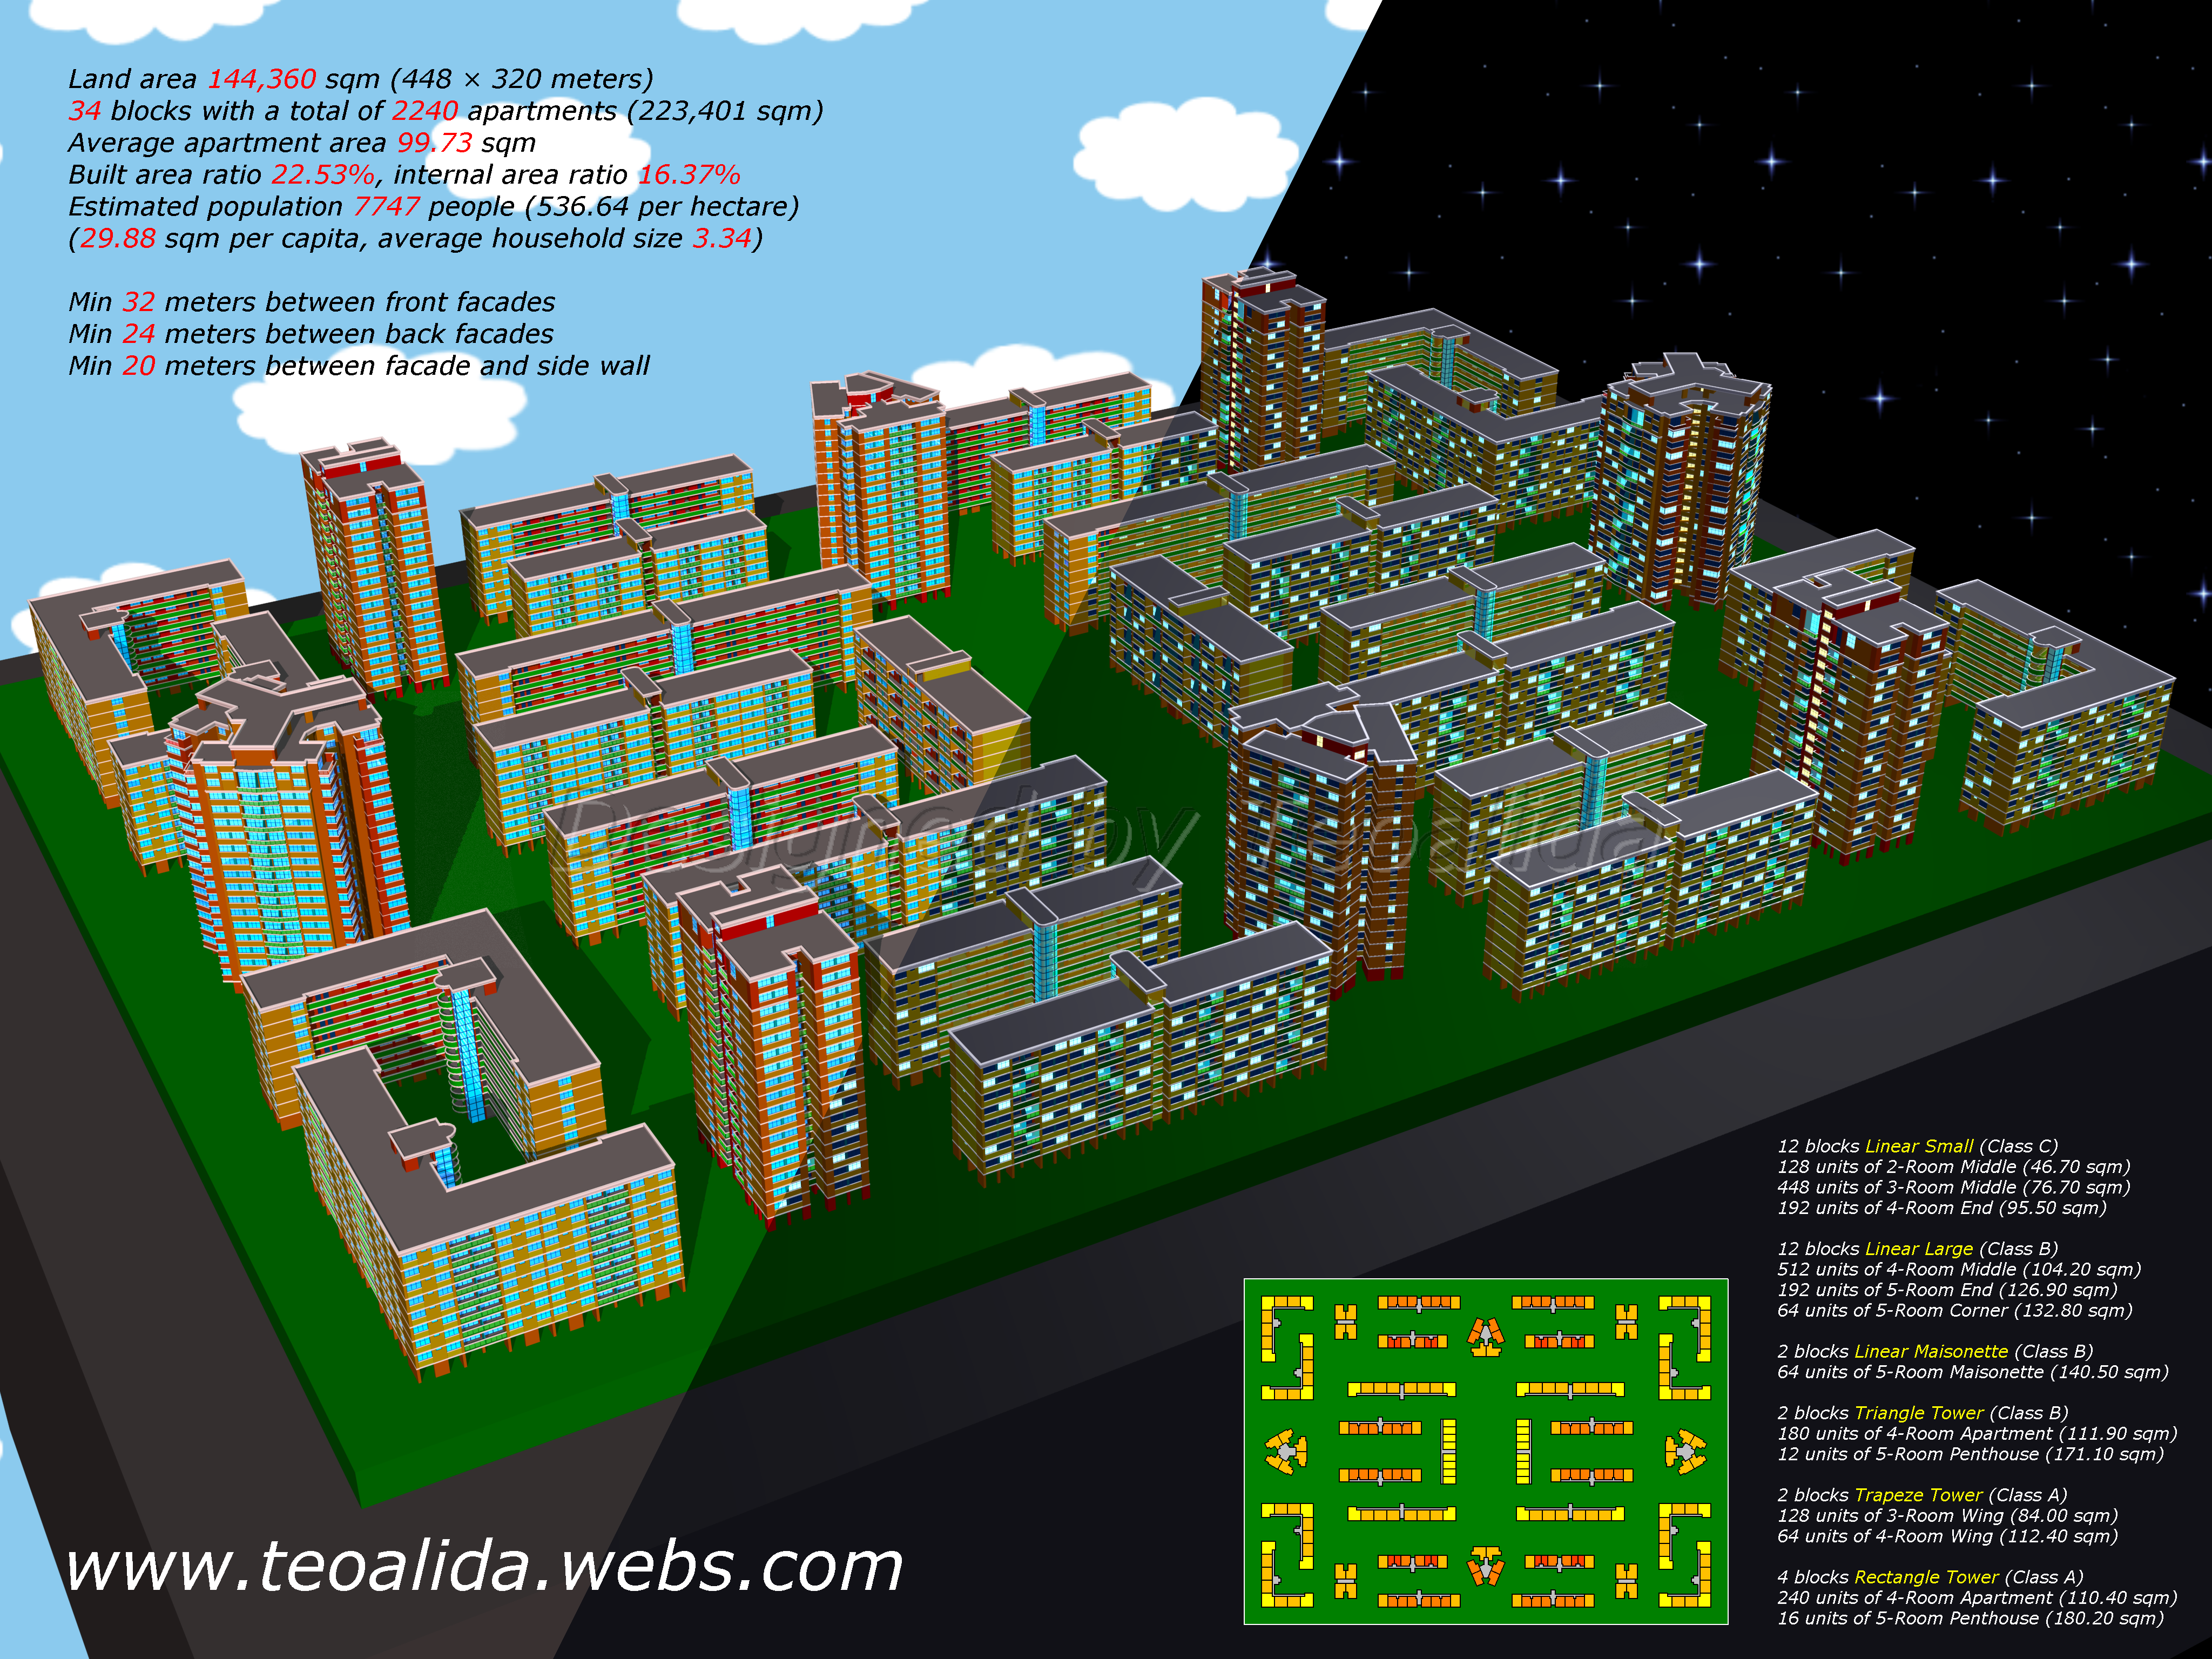 Building Code Rules For An Ideal Housing And City The World Of Teoalida